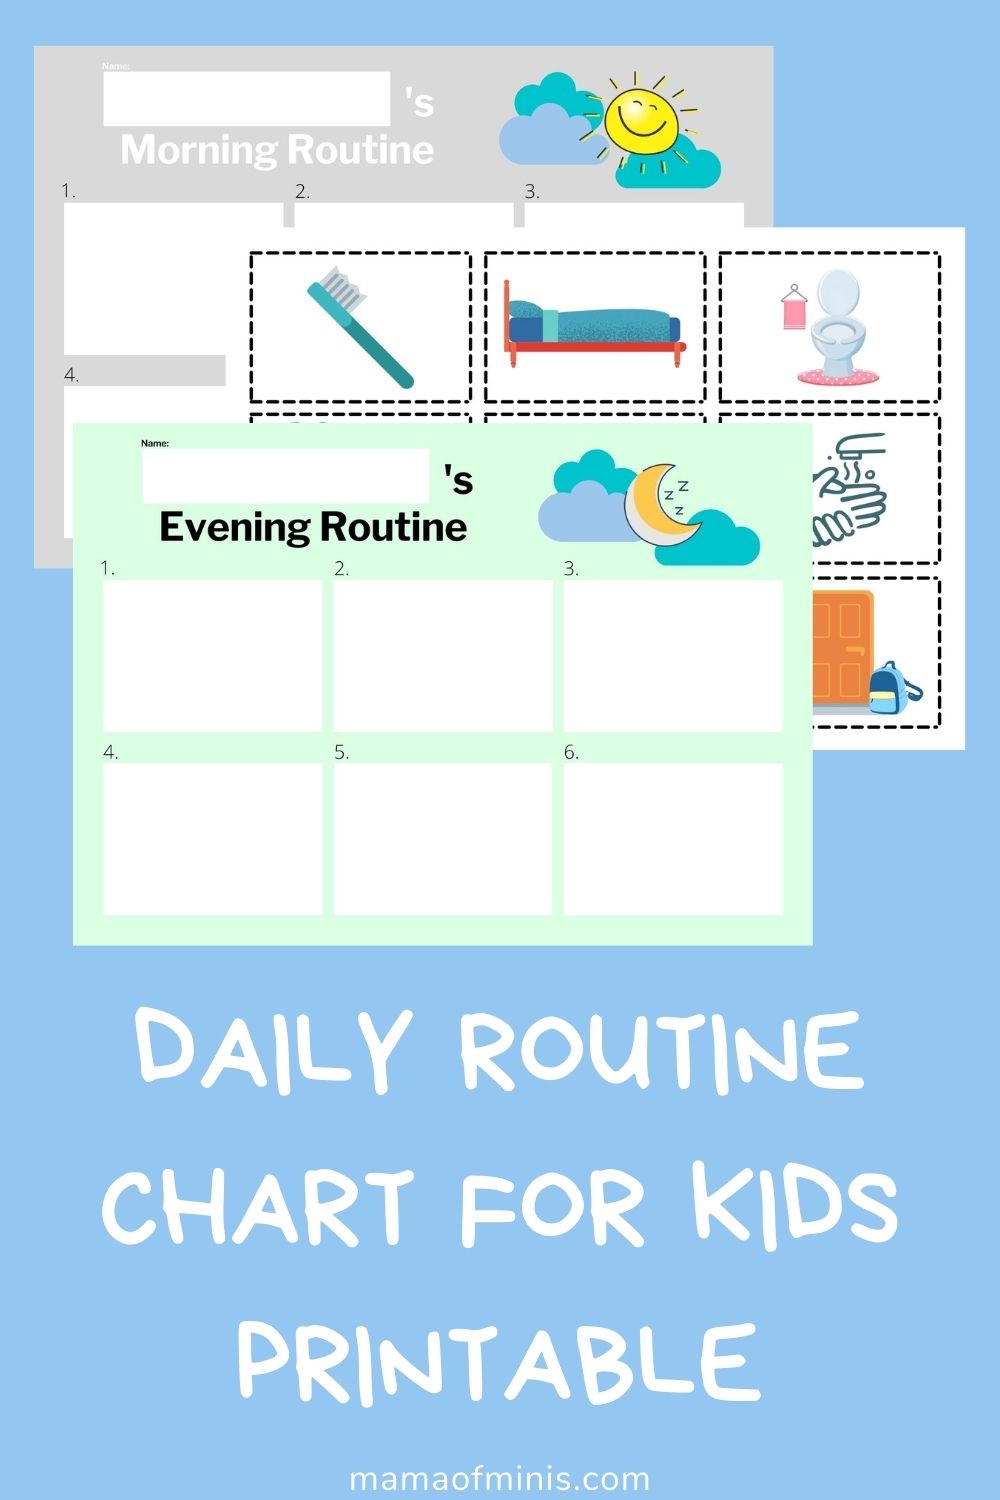 Daily Routine Chart for Kids Printable